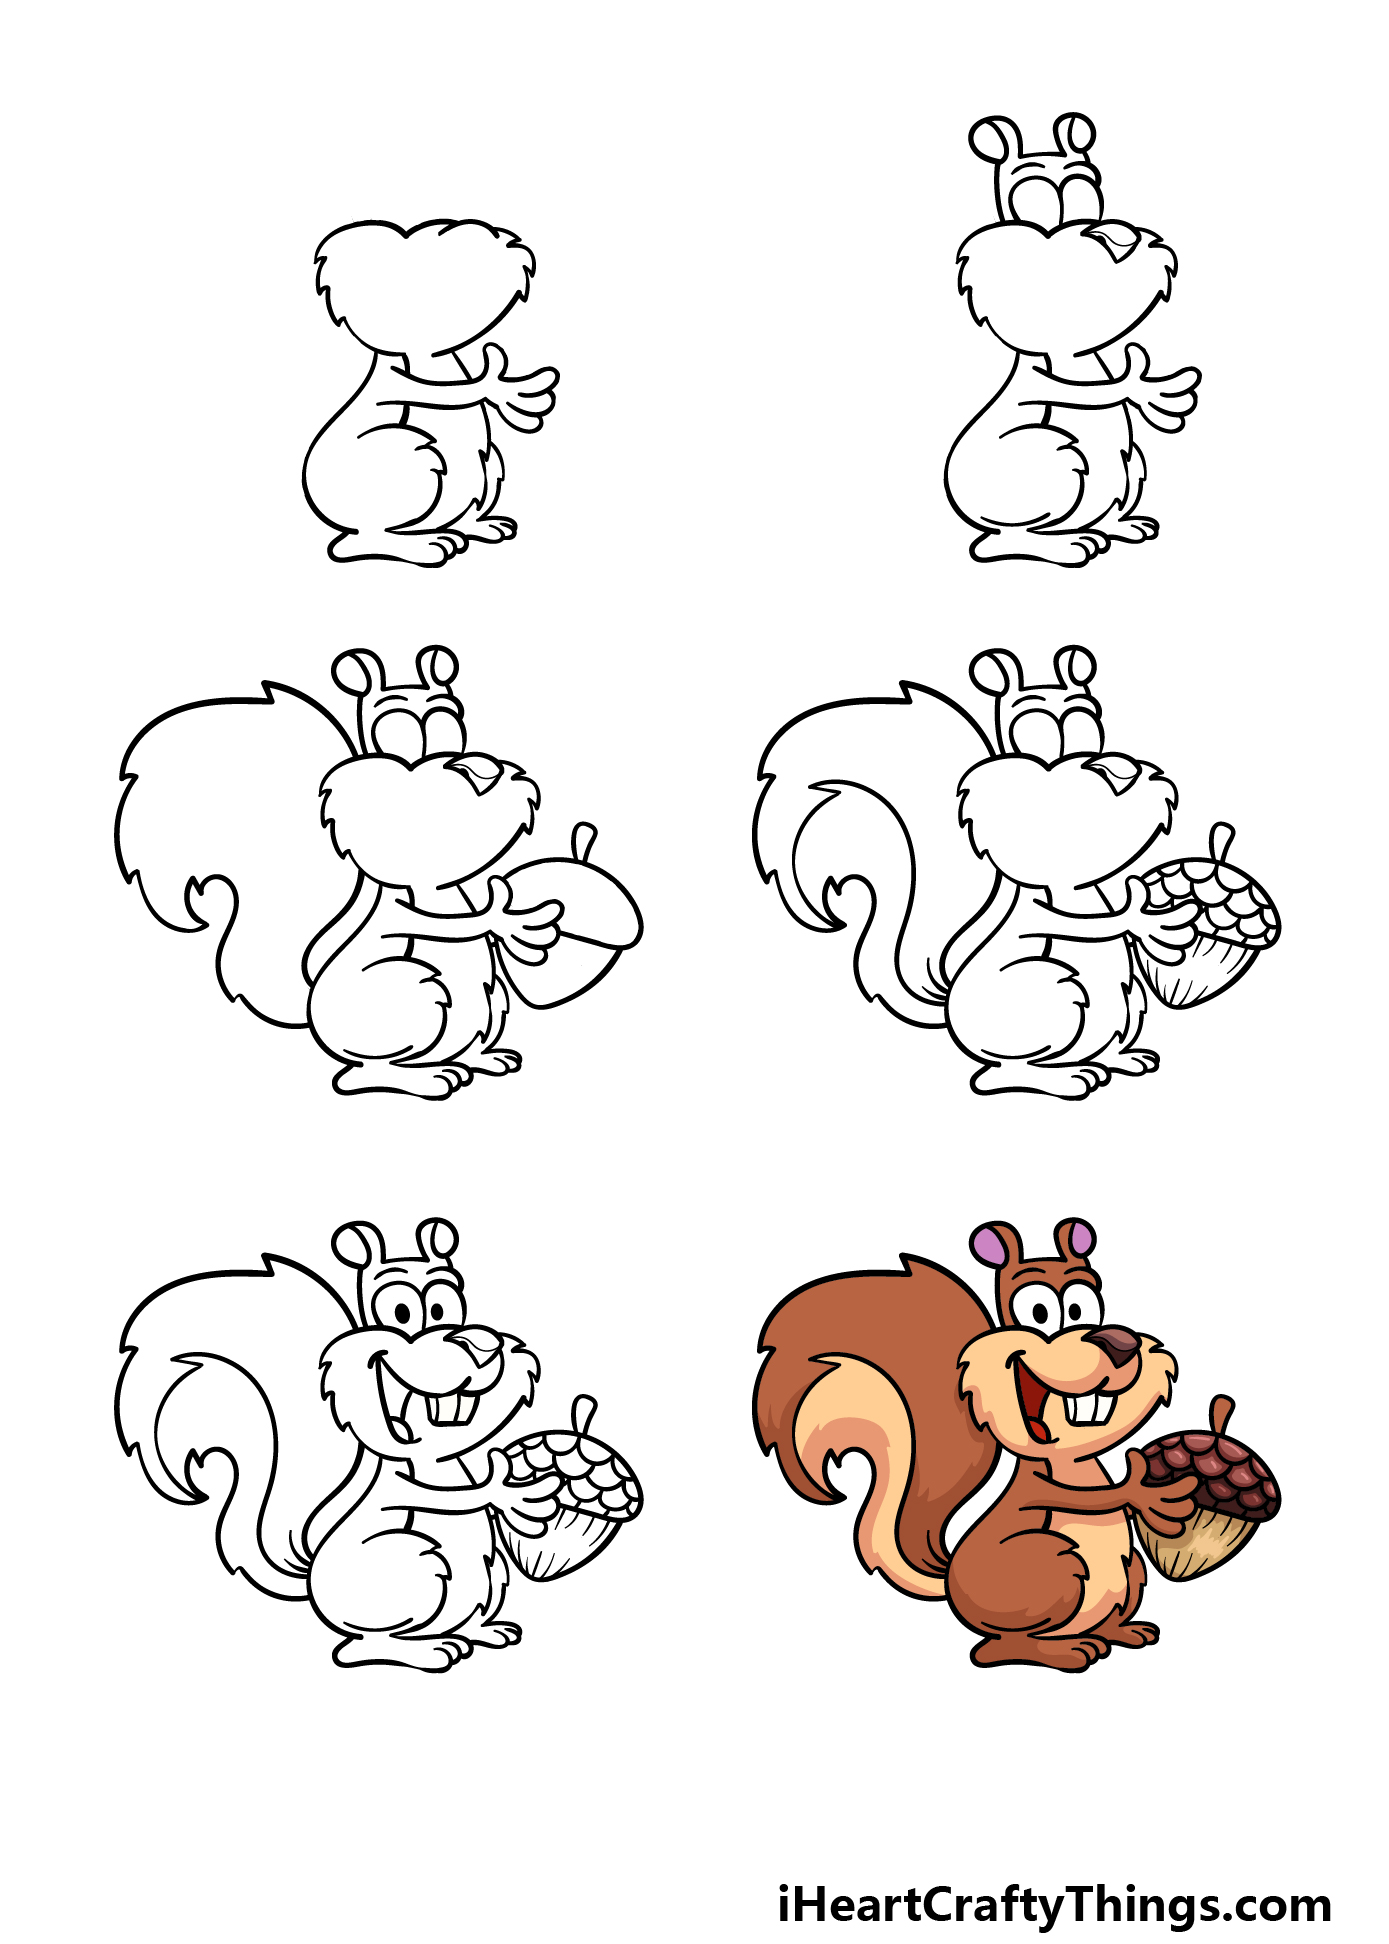 how to draw a cartoon squirrel in 6 steps